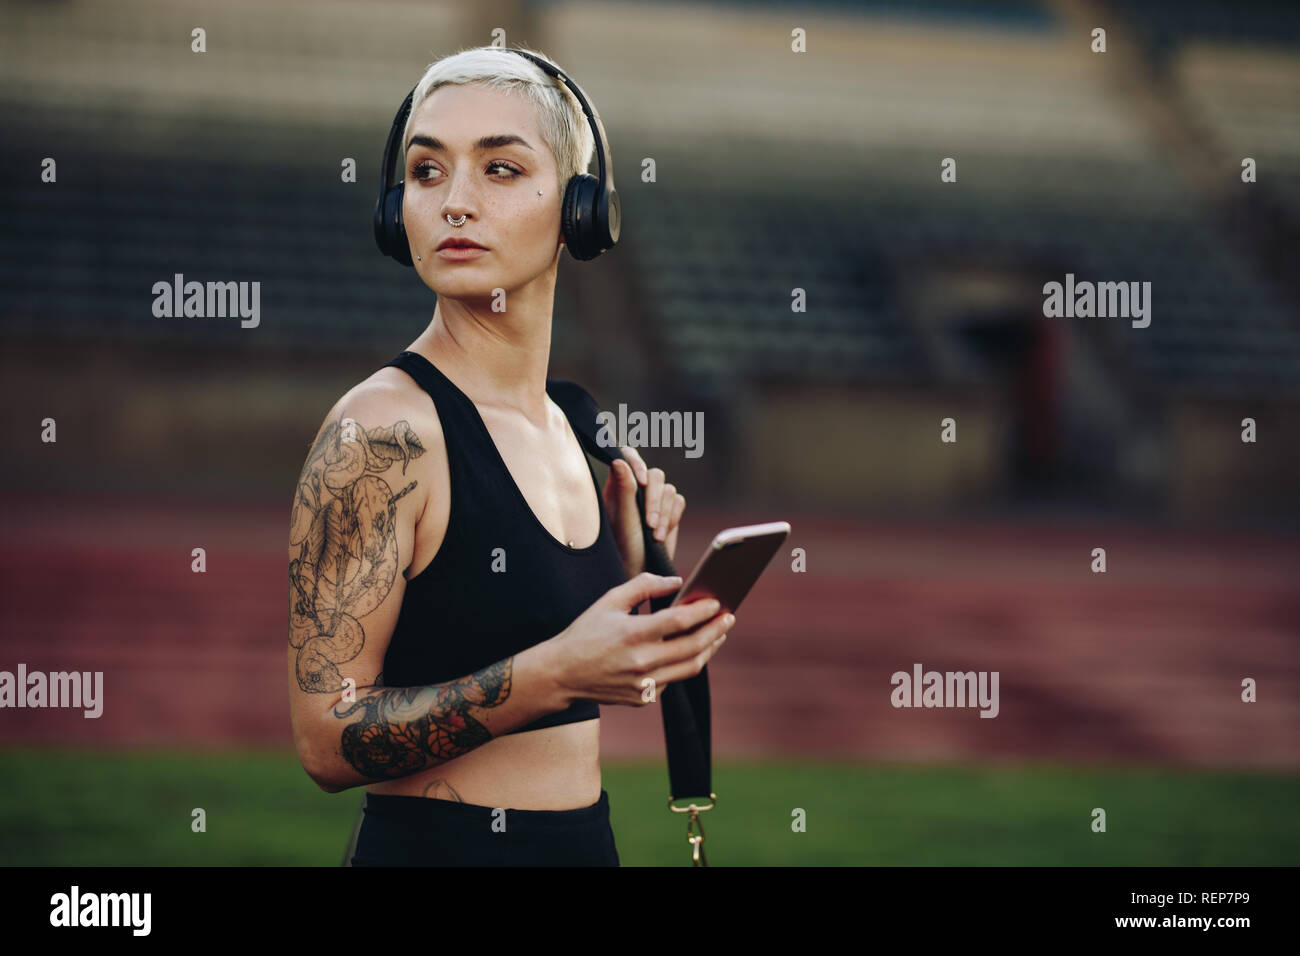 Side view of a female runner standing inside a track and field stadium carrying her bag. Female athlete listening to music on wireless headphones hold Stock Photo